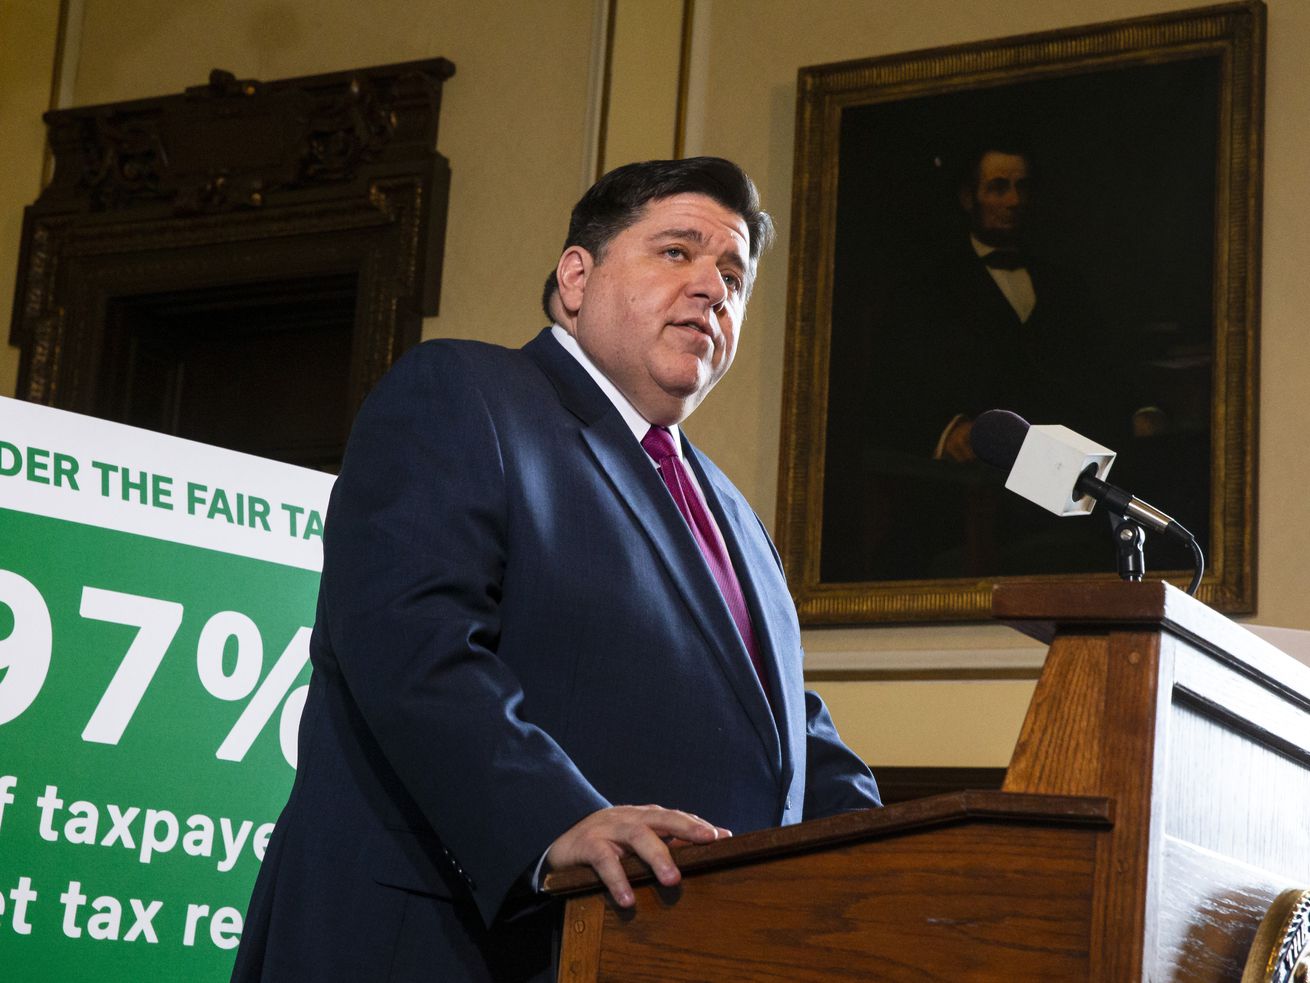 On March 7, 2019, Gov. J.B. Pritzker unveiled his graduated income tax plan in the governor’s office at the Illinois State Capitol.